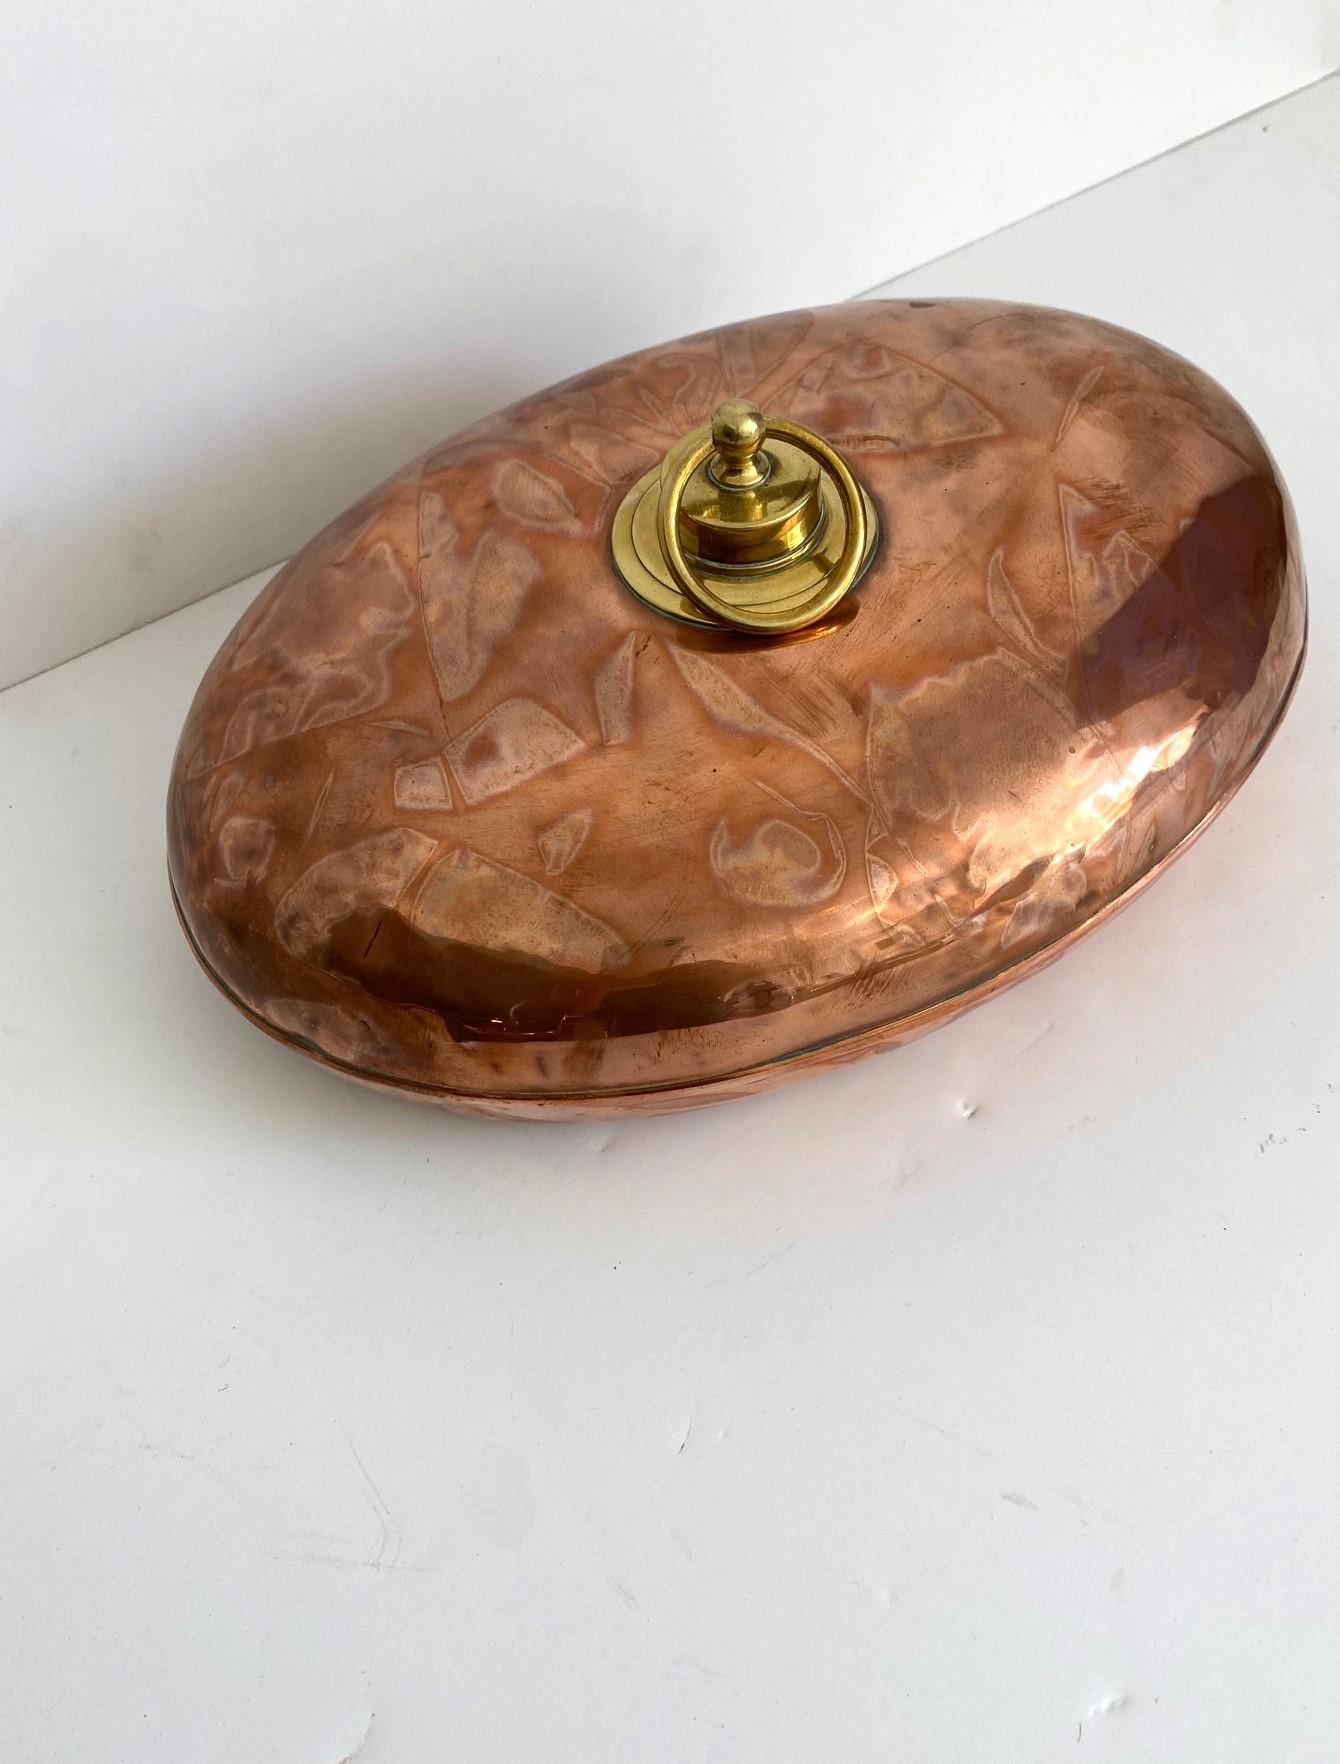 19th-century copper bed warmer with a brass cap.